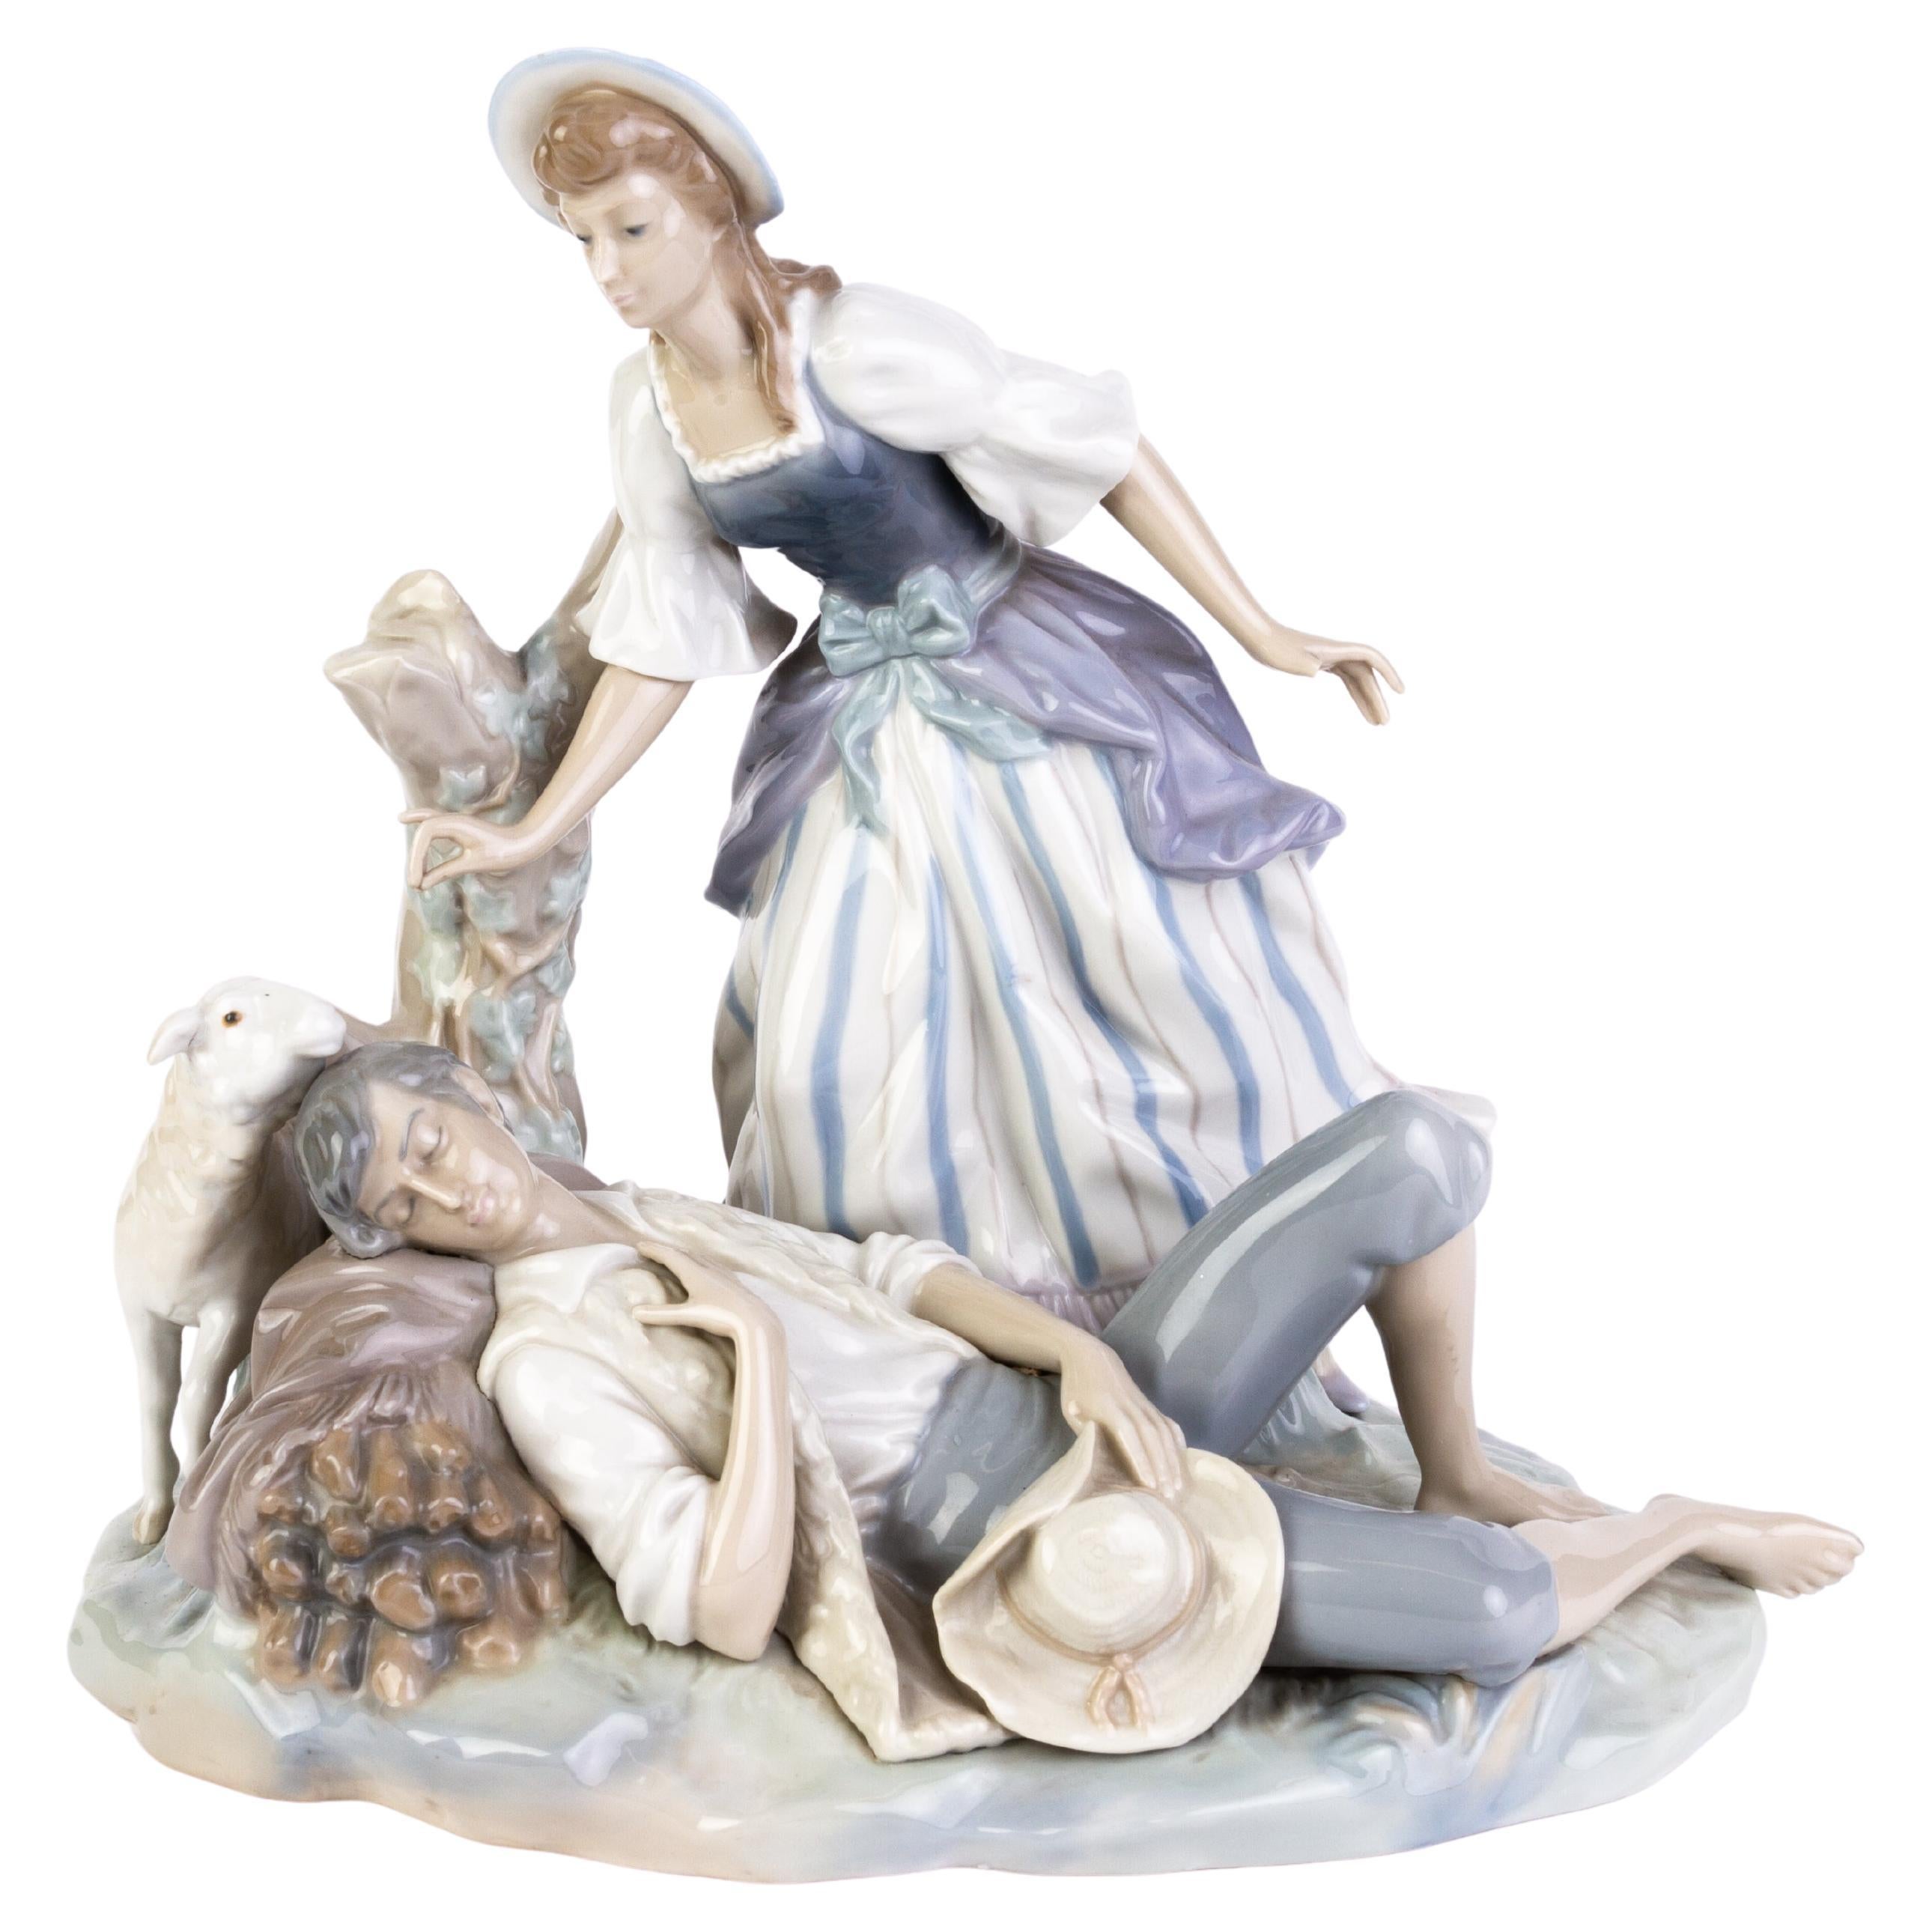 Retired Lladro Fine Porcelain Sculpture Figure Group "Rest in the Country" 4760 For Sale